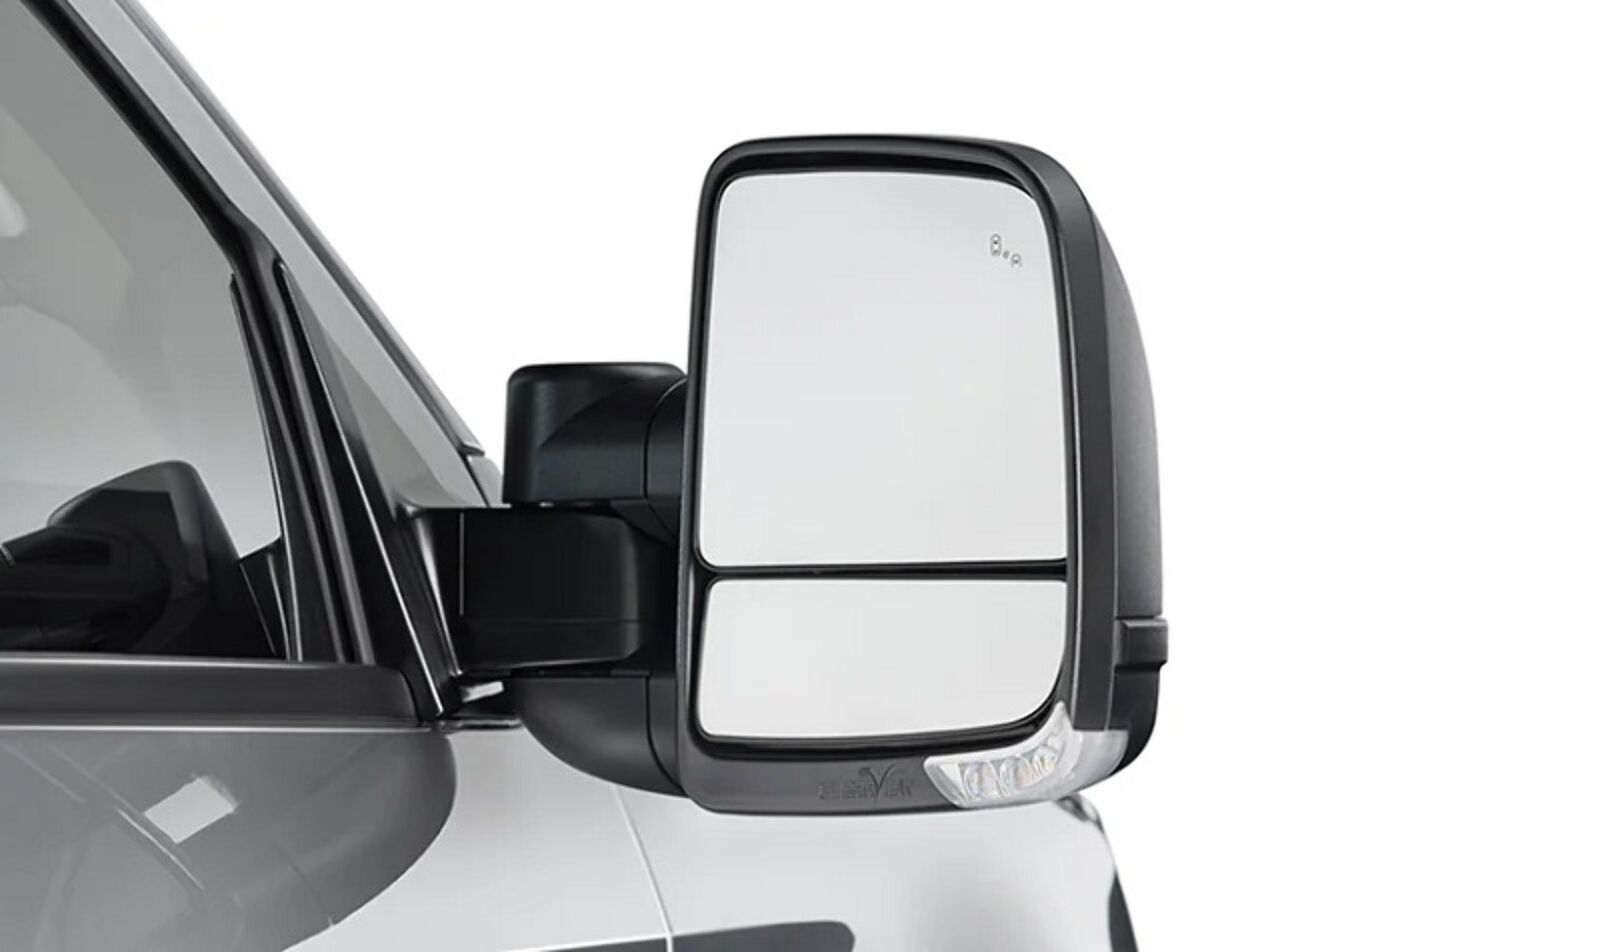 Isuzu D-Max (2021-2025) Clearview Towing Mirrors